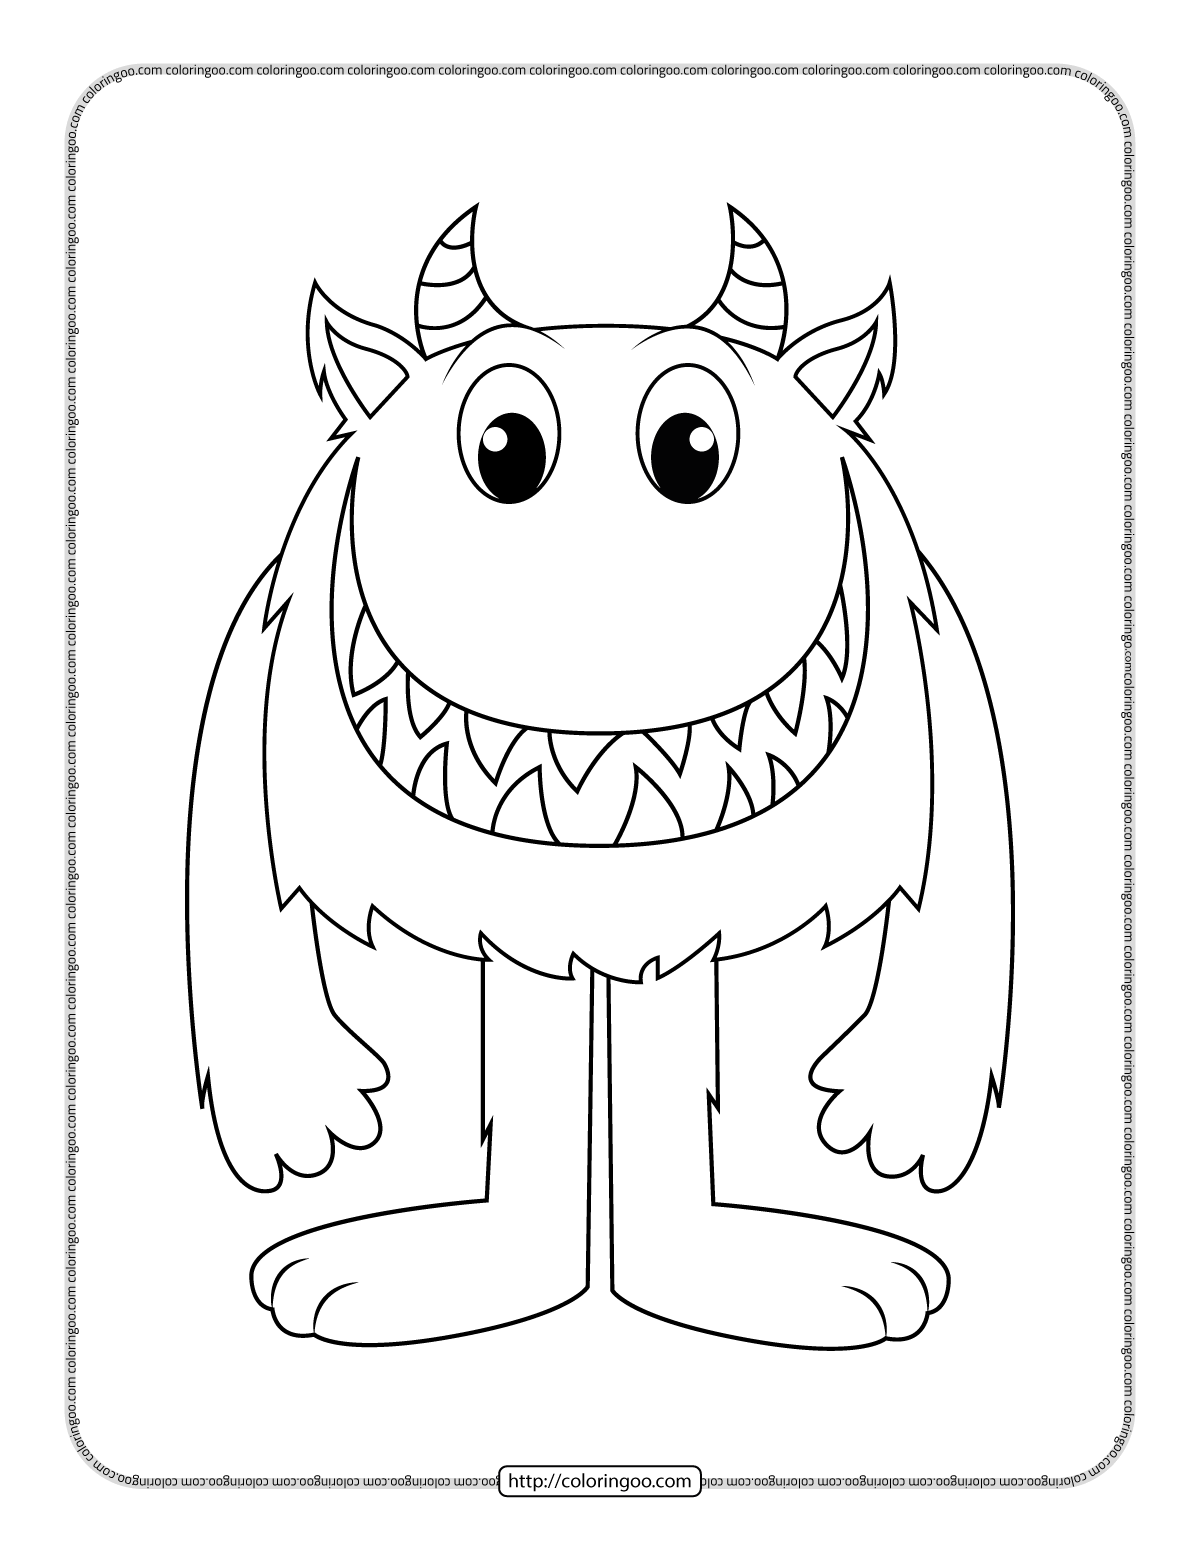 cute horned monster coloring page